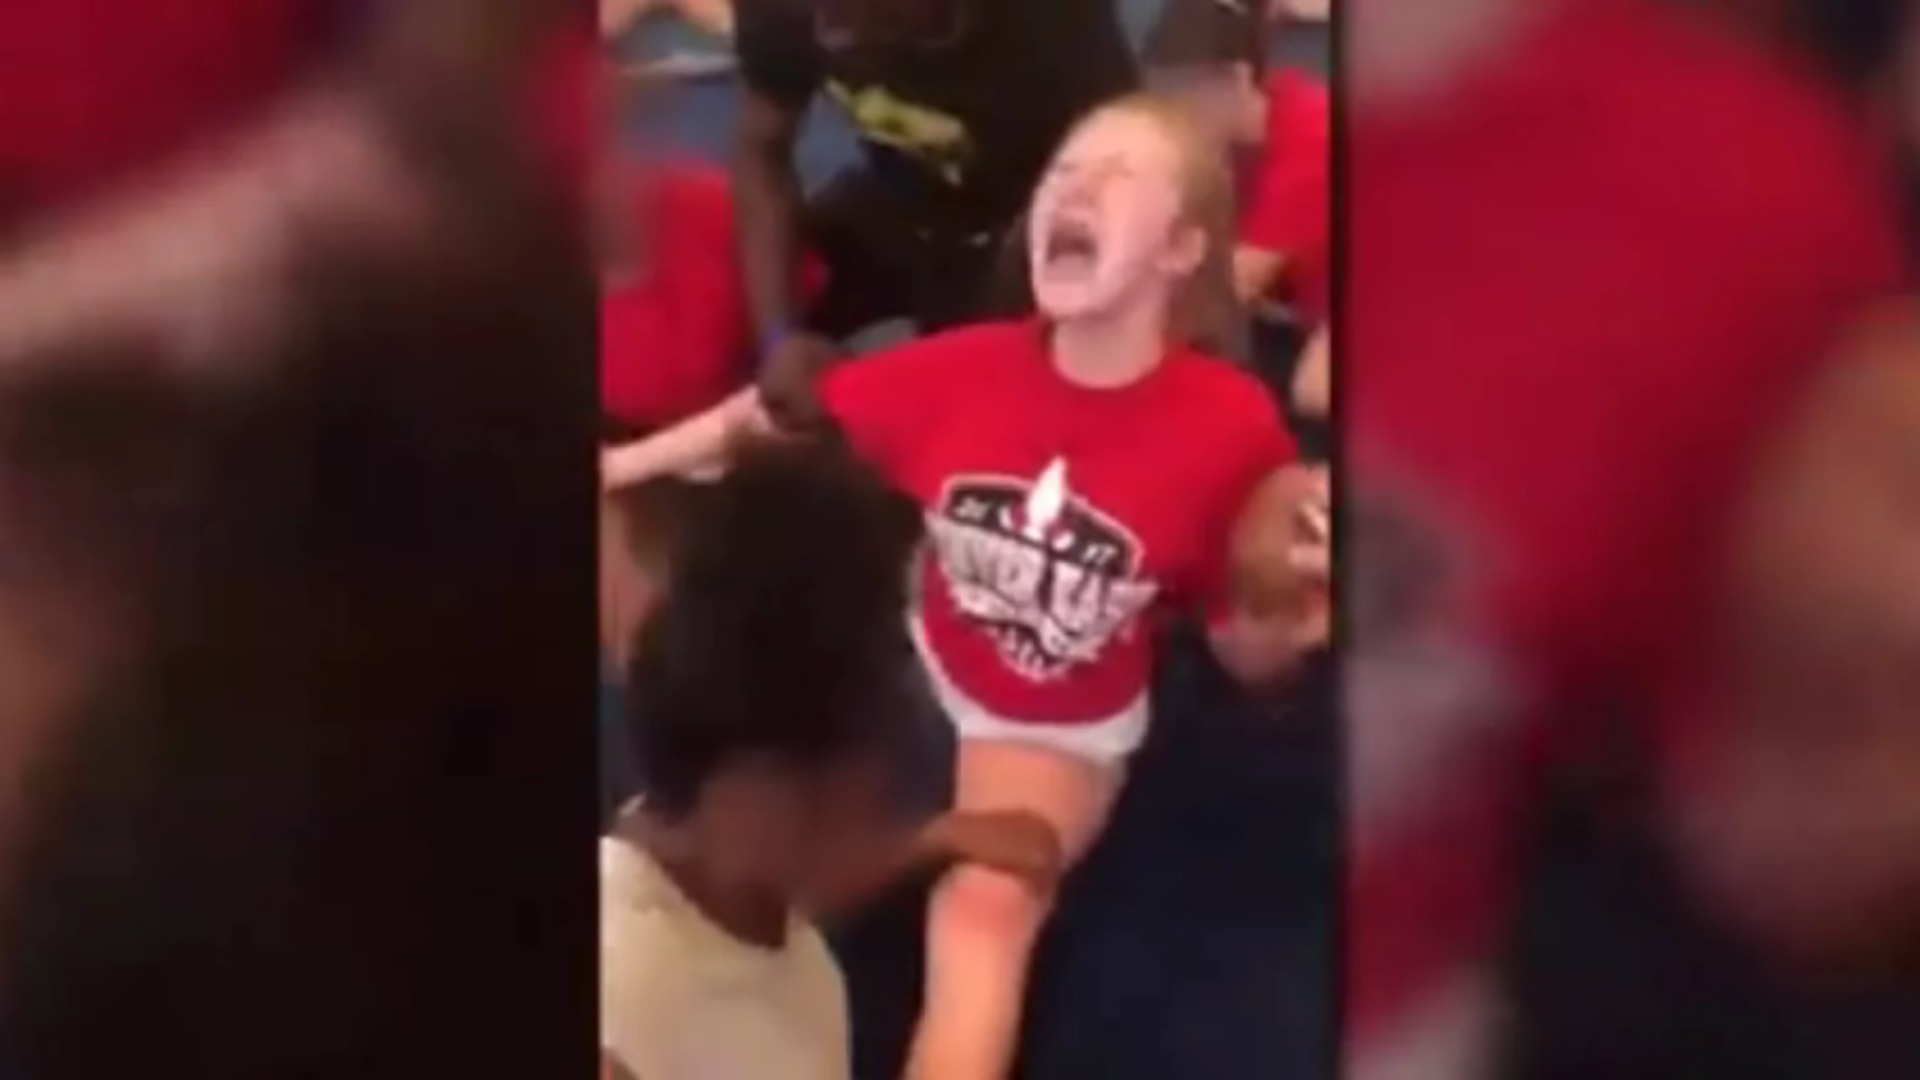 Forced - Disturbing video shows high school cheerleaders screaming as they're forced  to do splits - The Washington Post